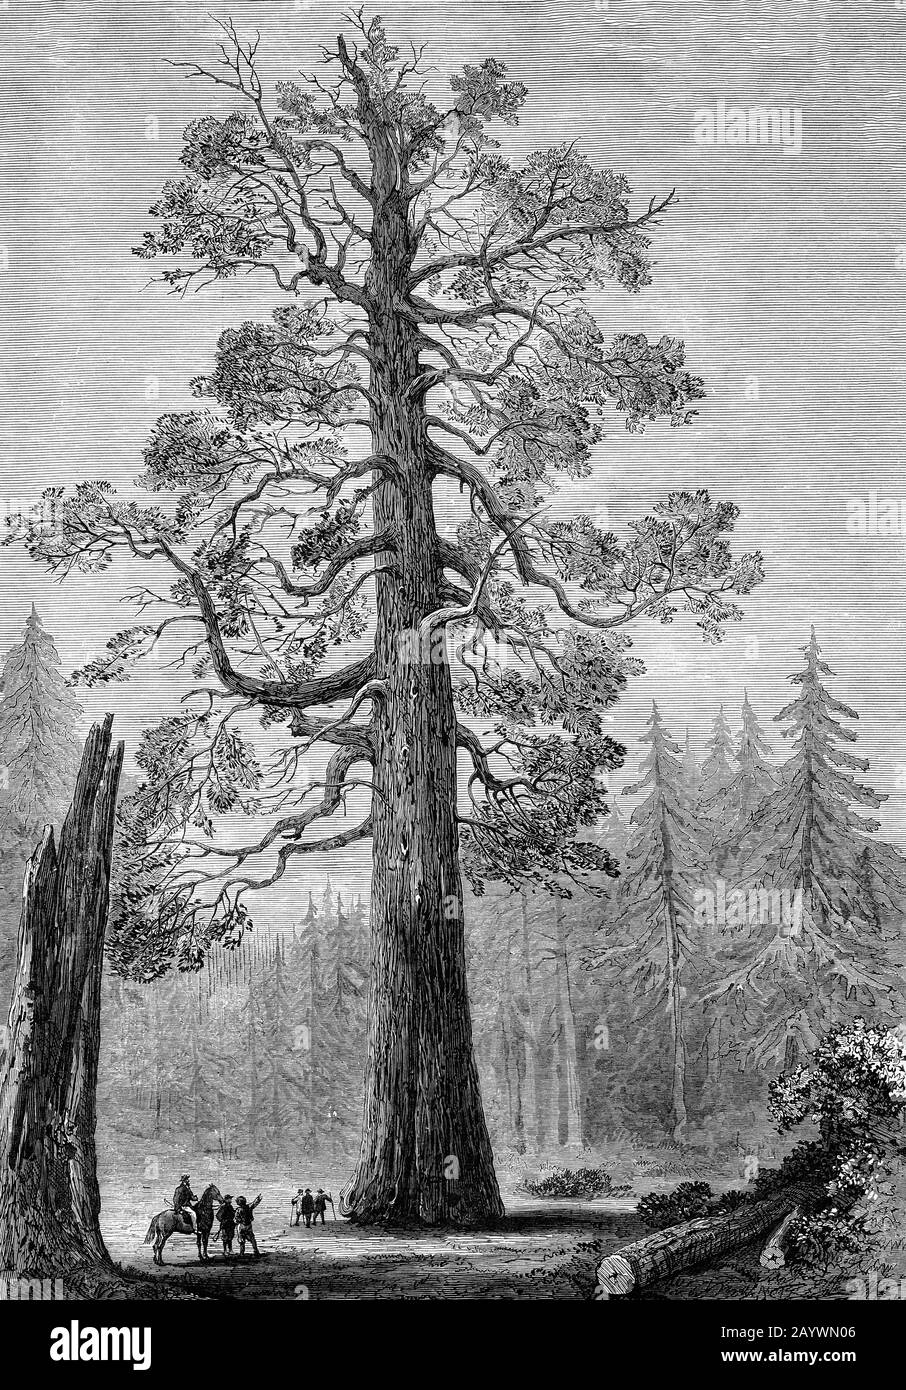 The 'Grizzly Giant', a Wellingtonia or Sequoia Gigantea in the big tree groves of Mariposa, California. They are able to reach a height of 300 feet and circumferance up to 90 feet. Botanists estimate the trees to be more than a thousand years old. Stock Photo